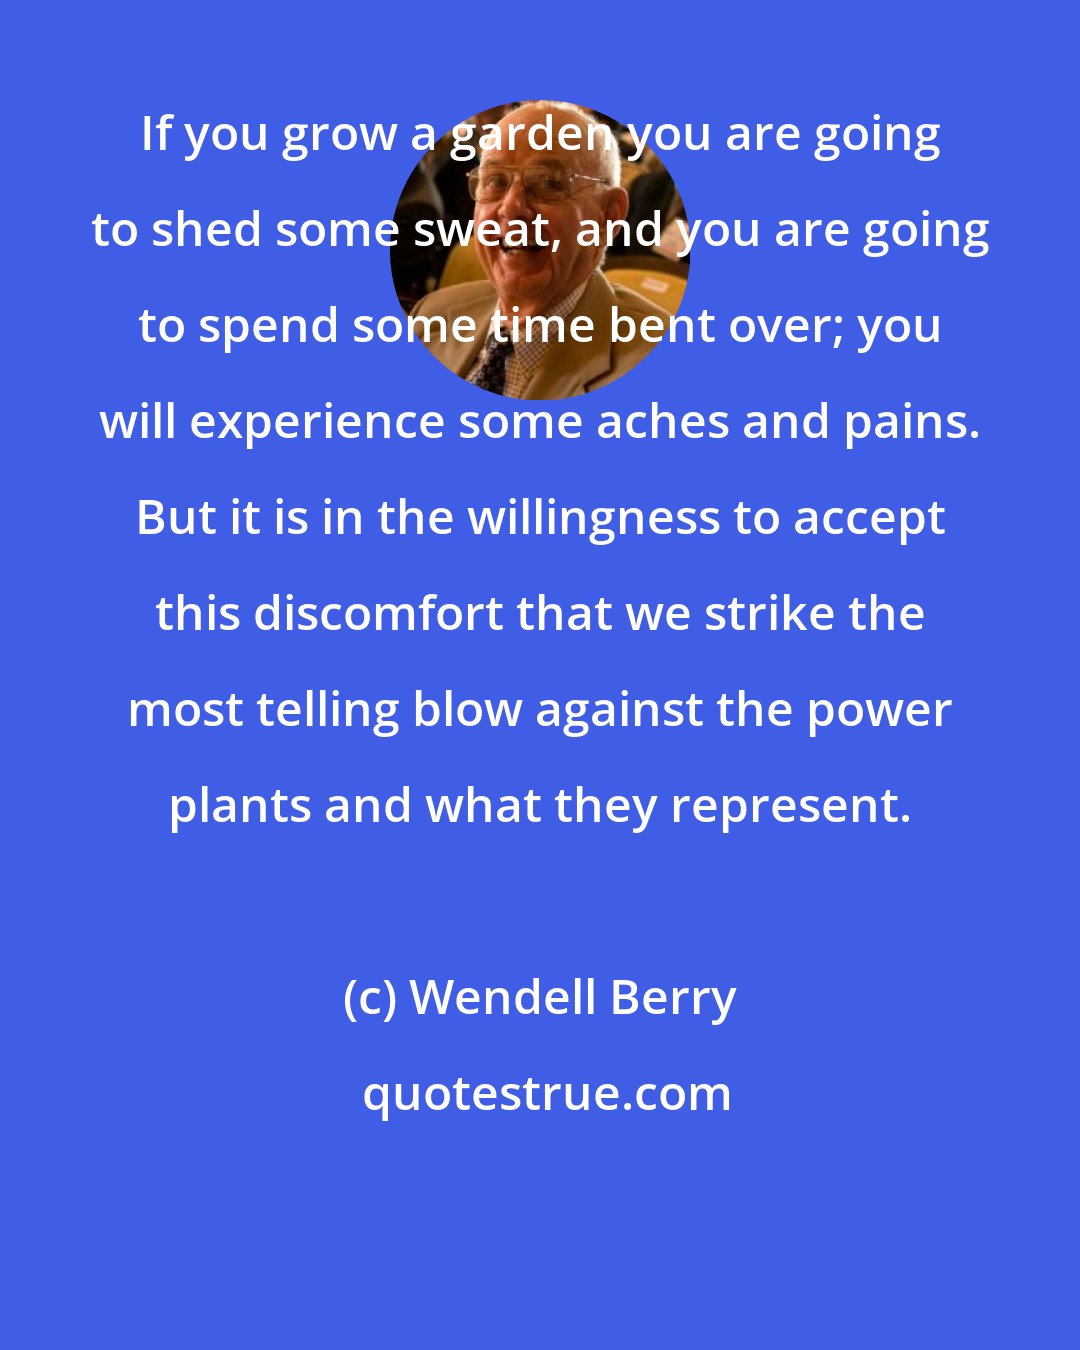 Wendell Berry: If you grow a garden you are going to shed some sweat, and you are going to spend some time bent over; you will experience some aches and pains. But it is in the willingness to accept this discomfort that we strike the most telling blow against the power plants and what they represent.